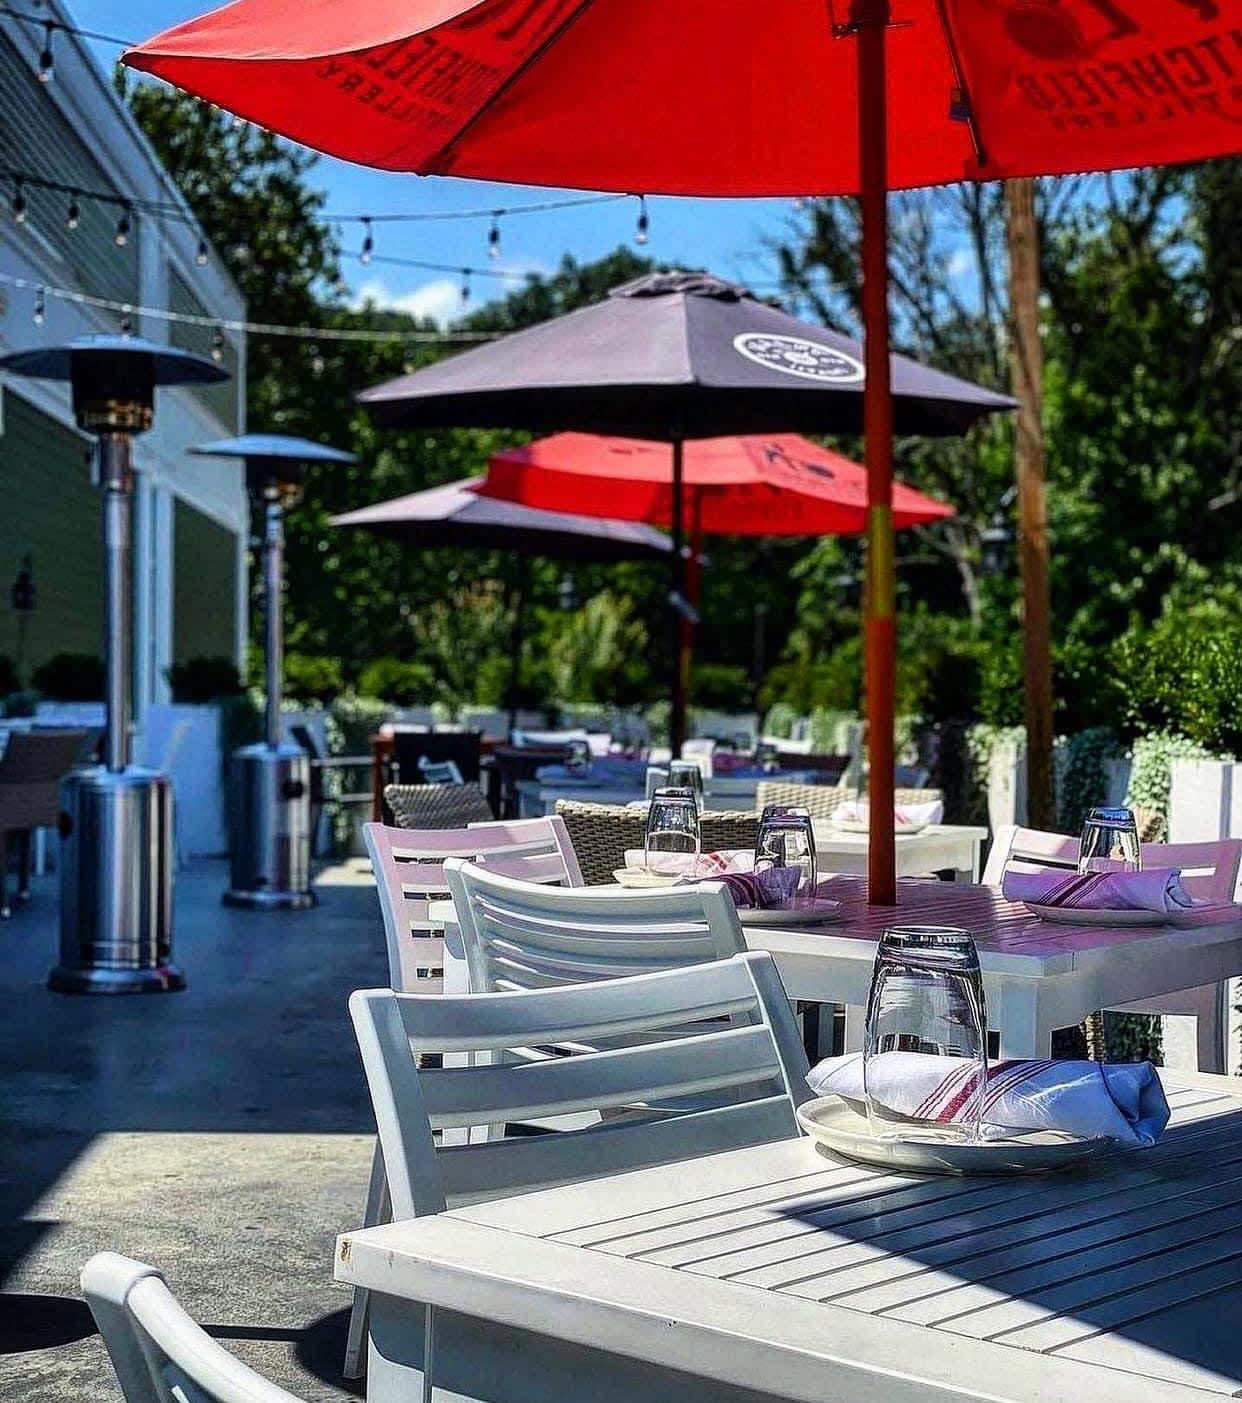 Spring Weather Means Patio Days Are Upon Us!!

